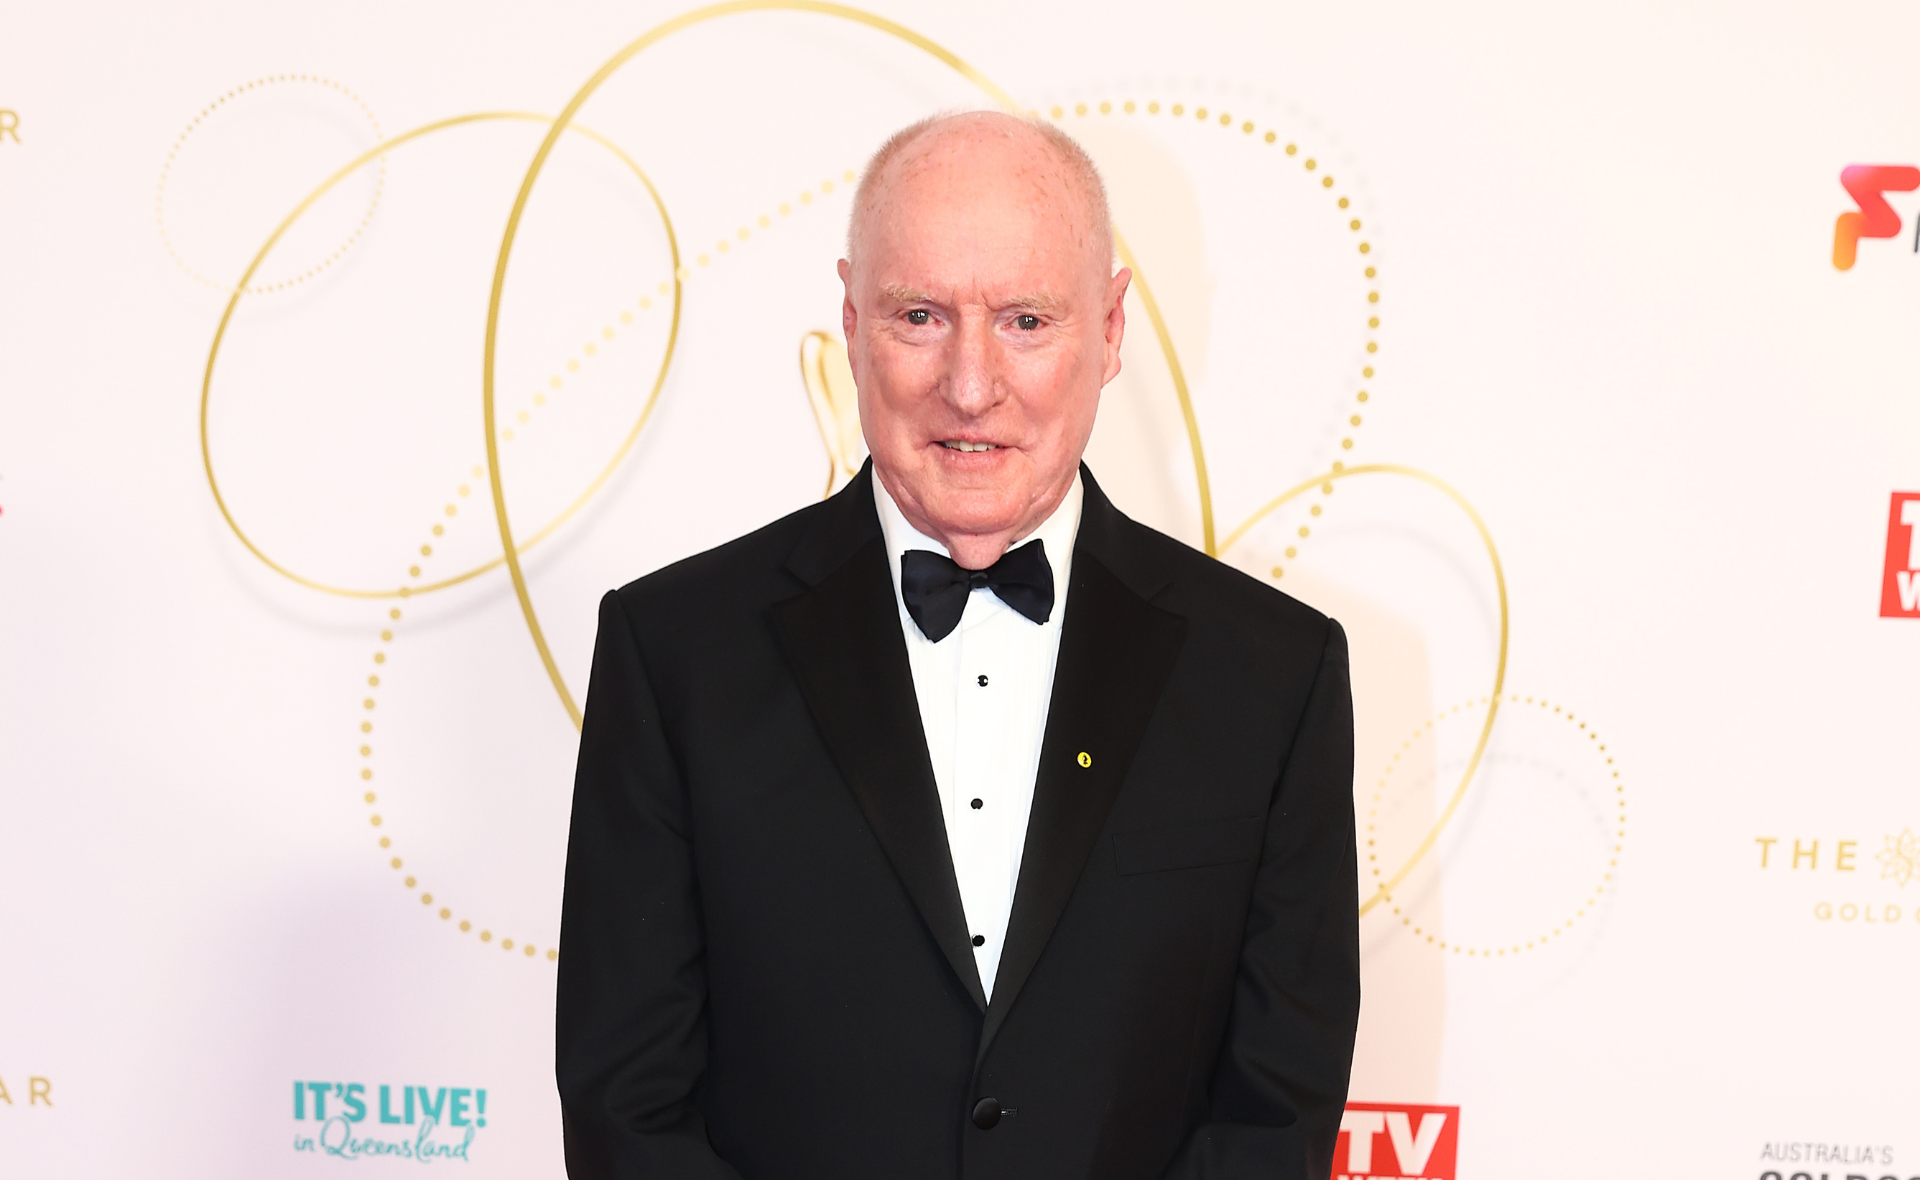 Ray Meagher on his exciting plans for 2023